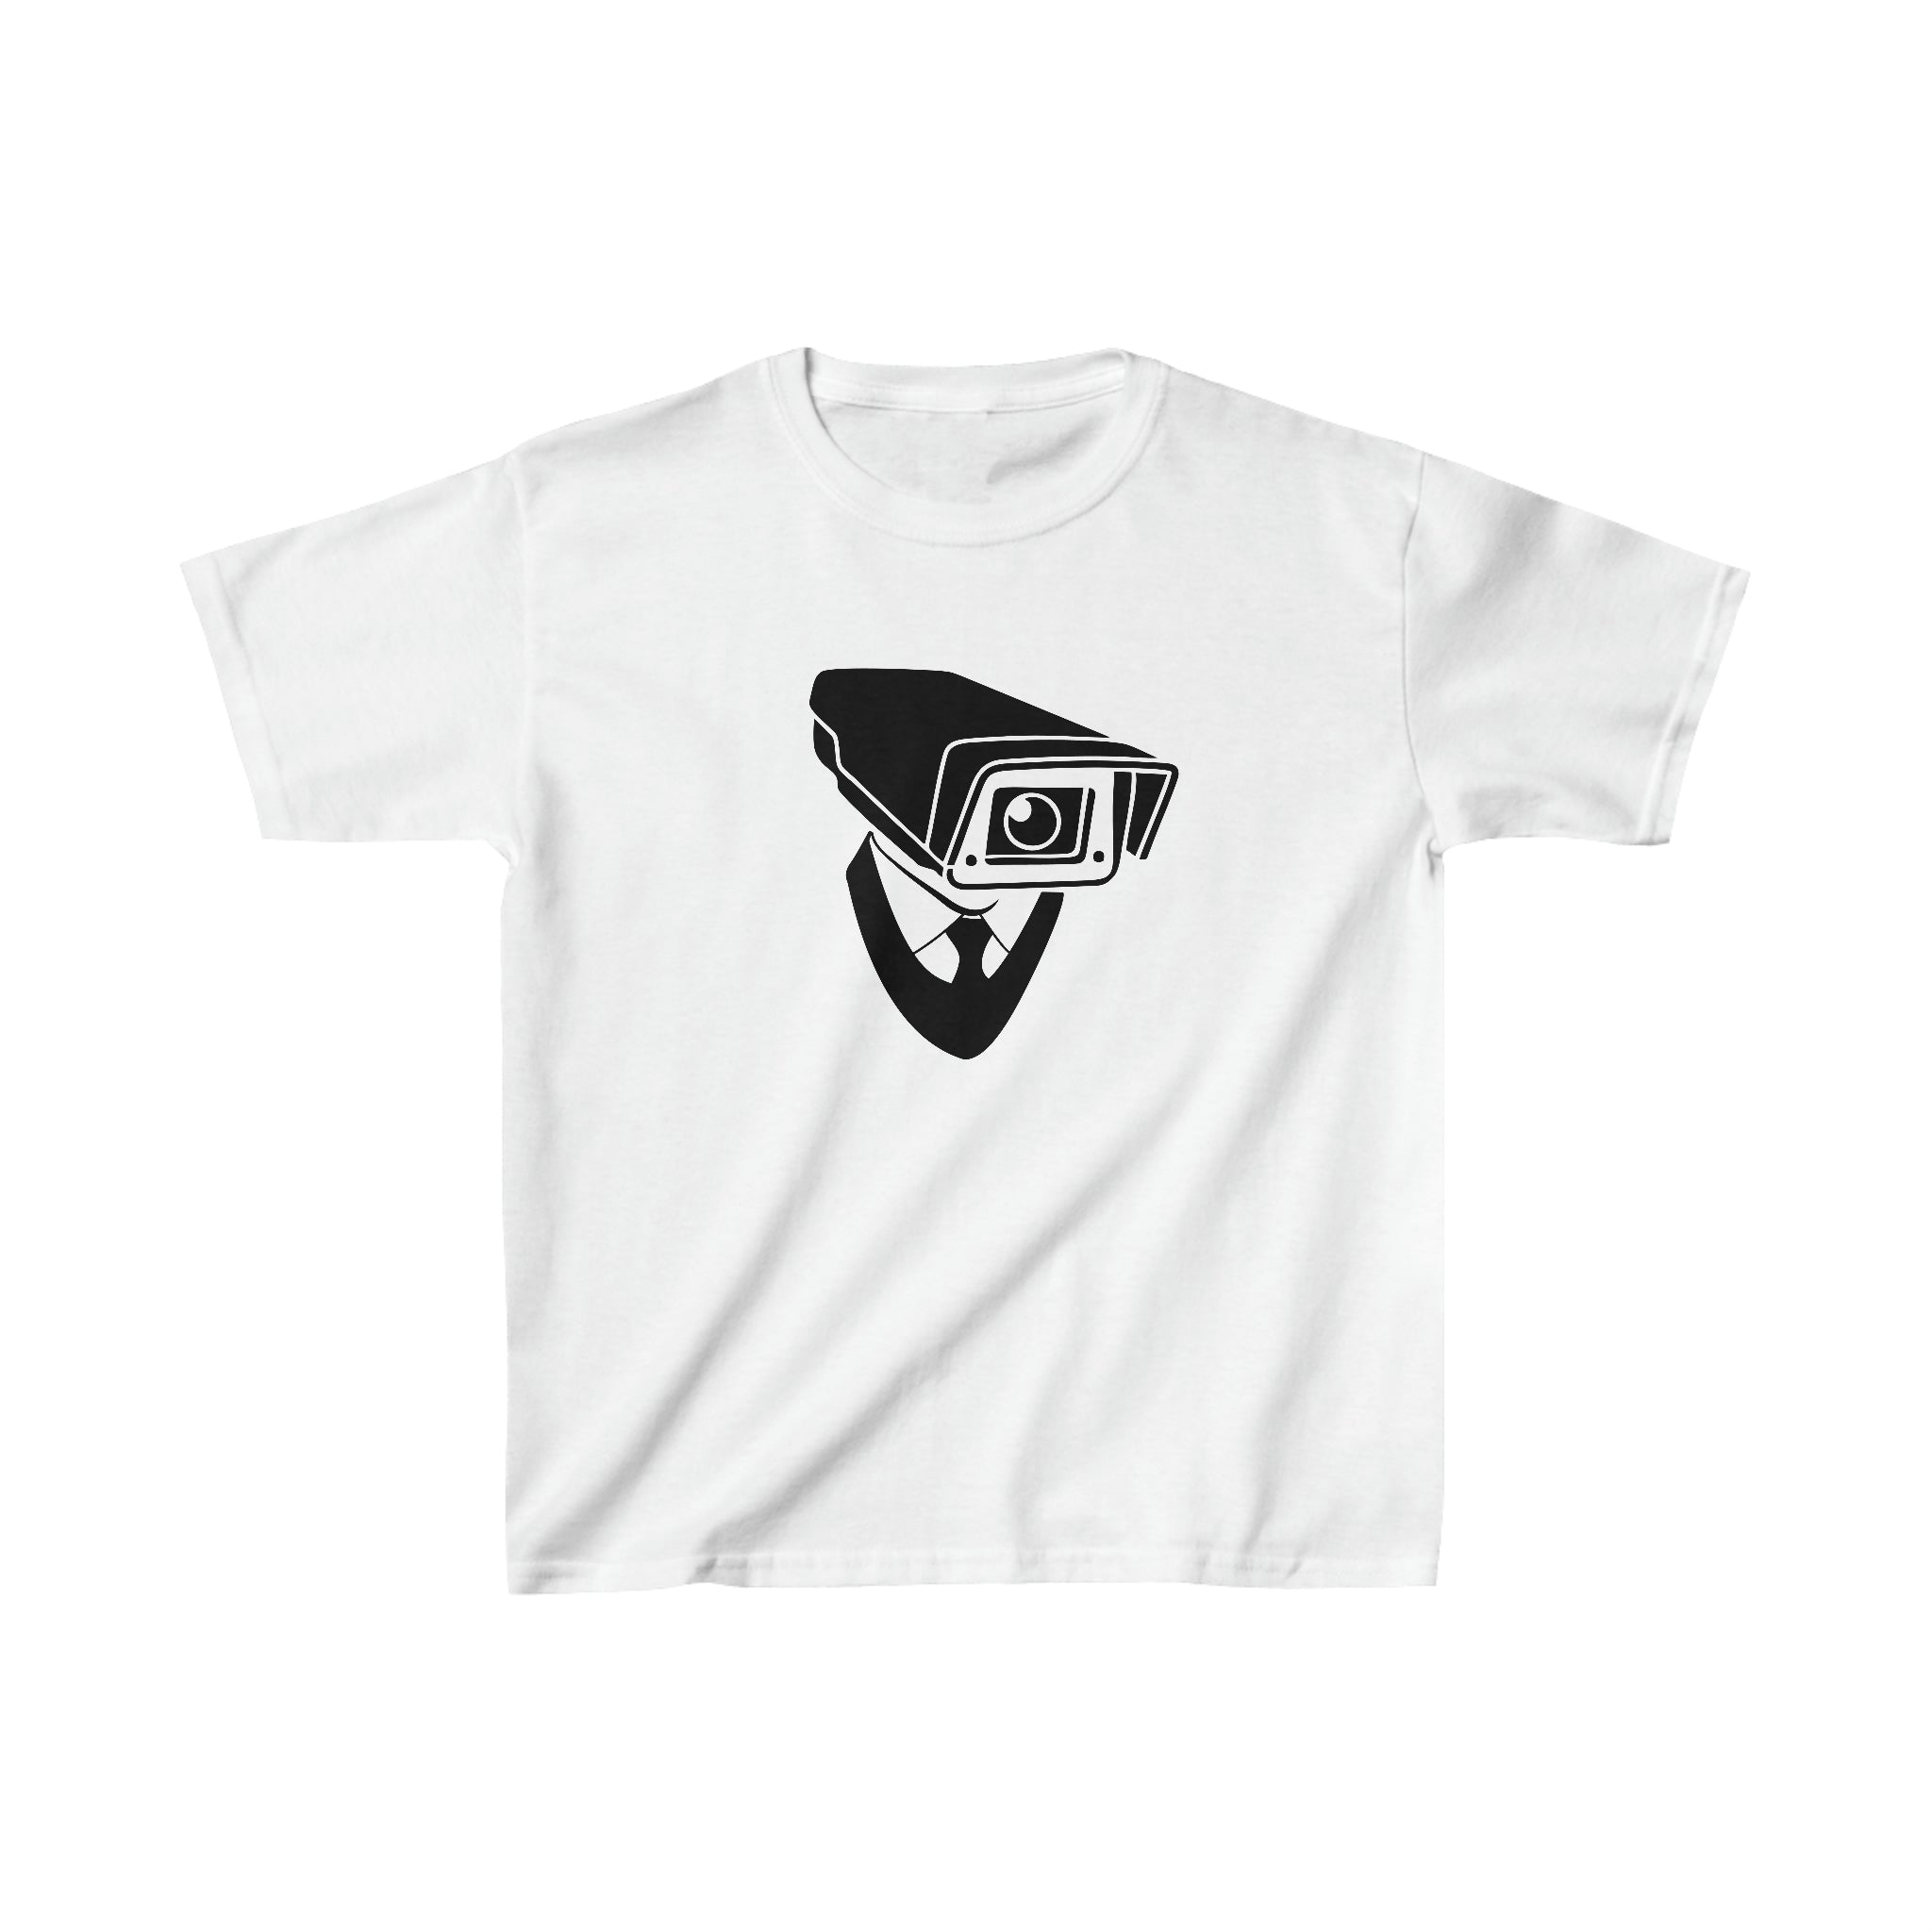 Surveillance Youth tee with the iconic cameraman centered White Tee on White Background